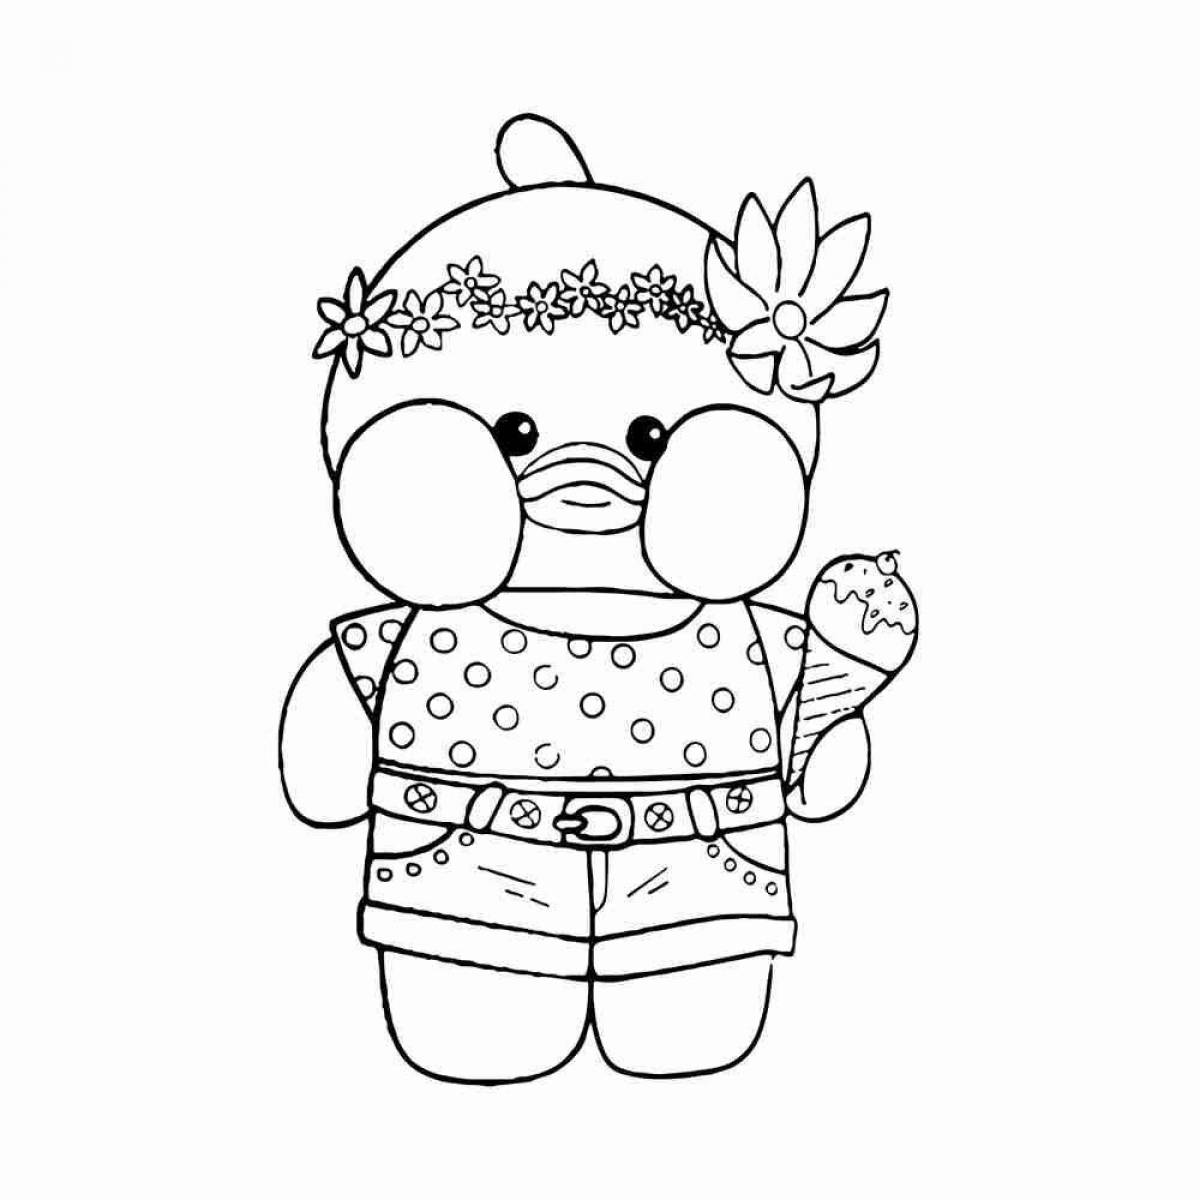 Lalafanfan sparkling duck coloring page